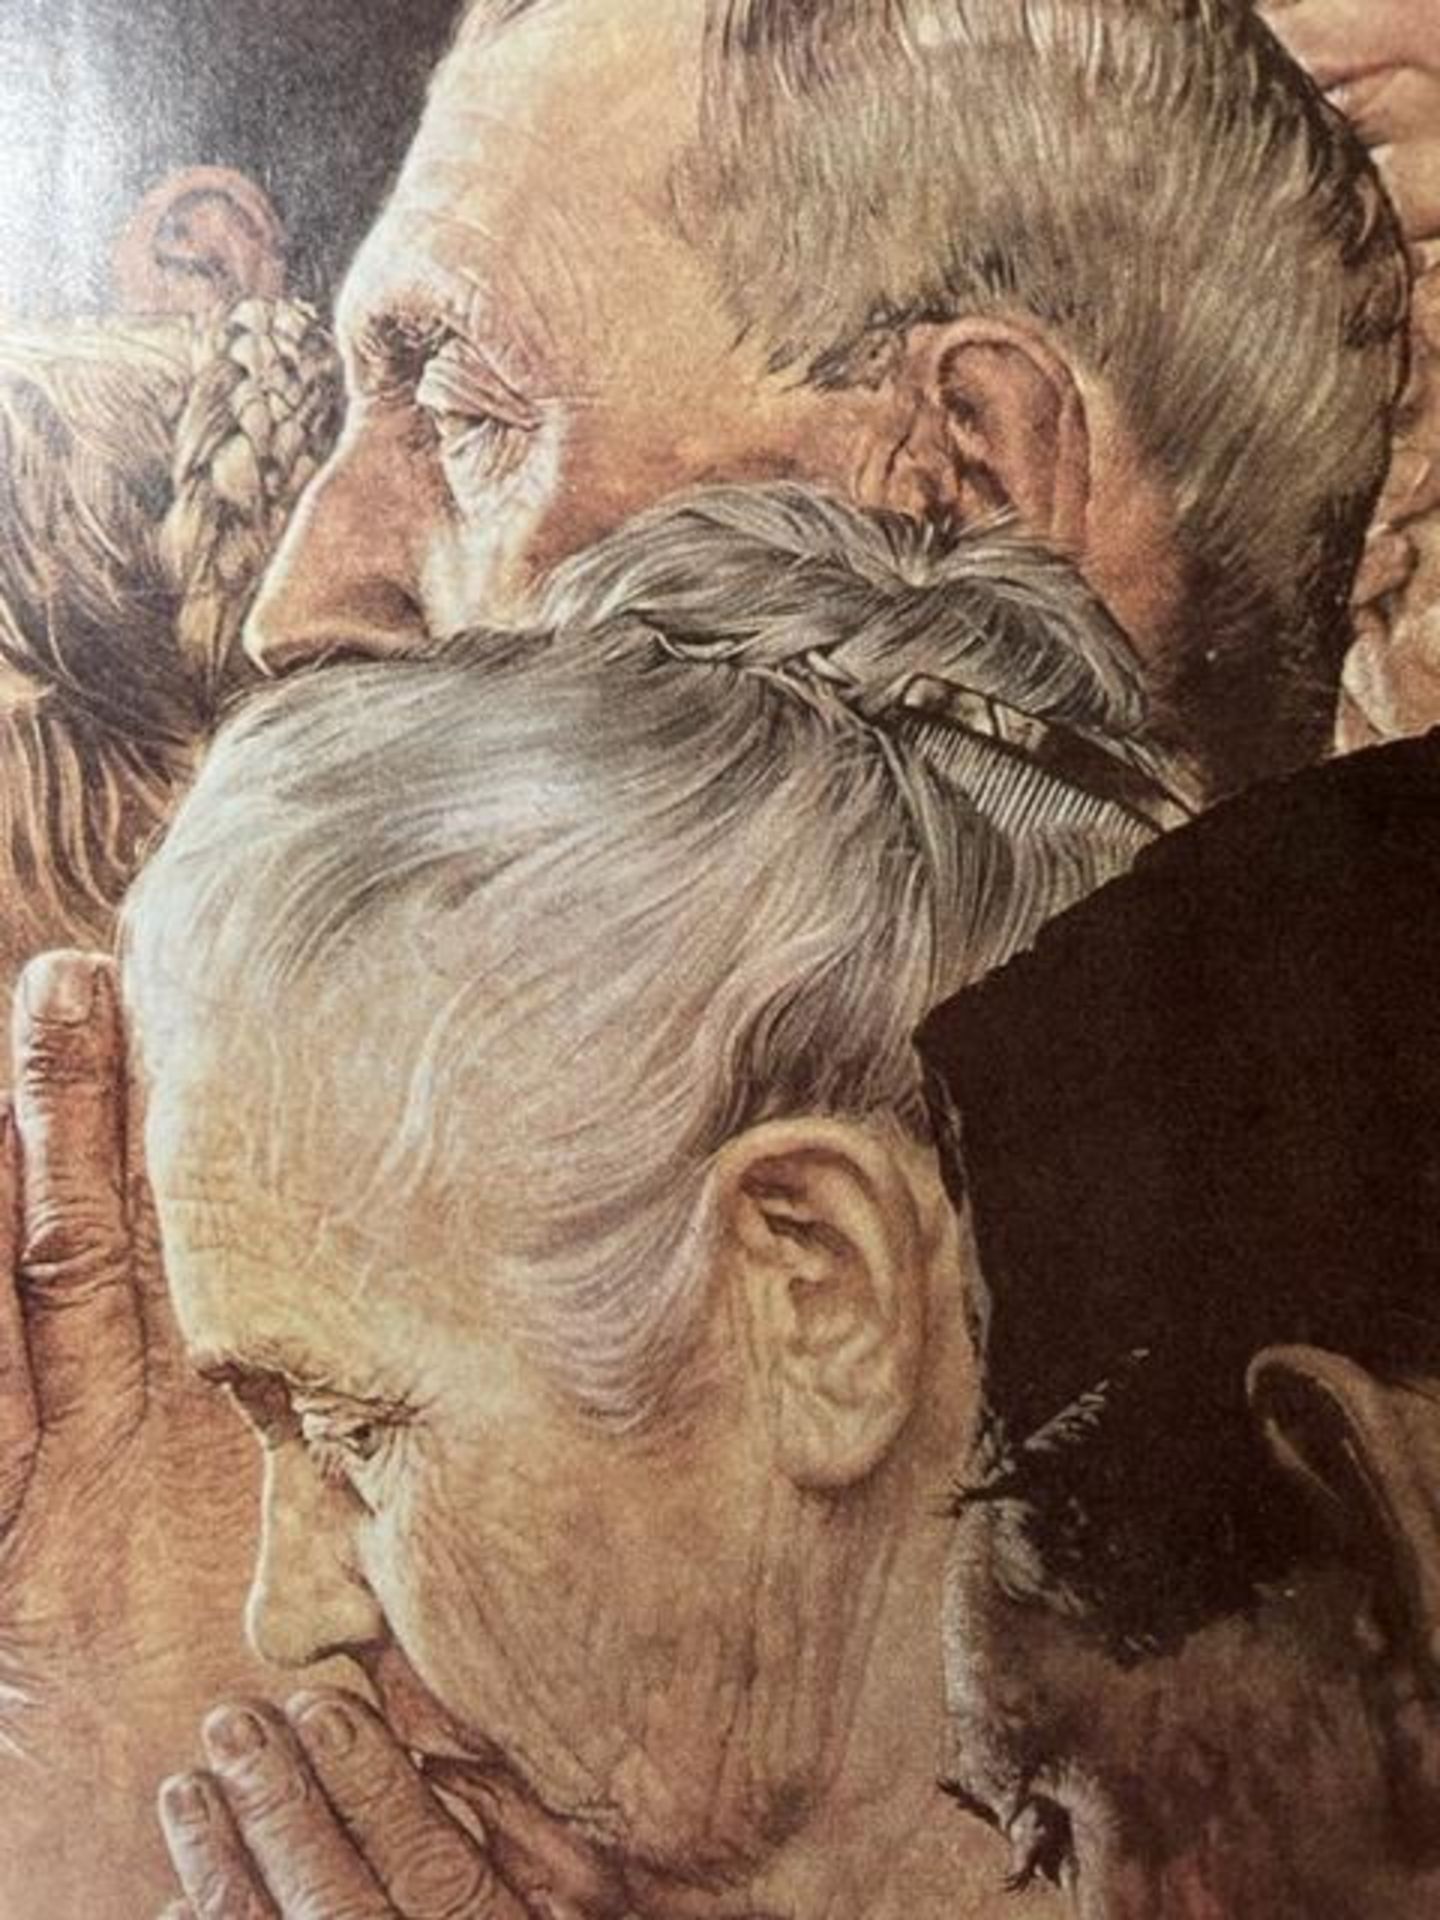 Norman Rockwell "Untitled" Print. - Image 5 of 6